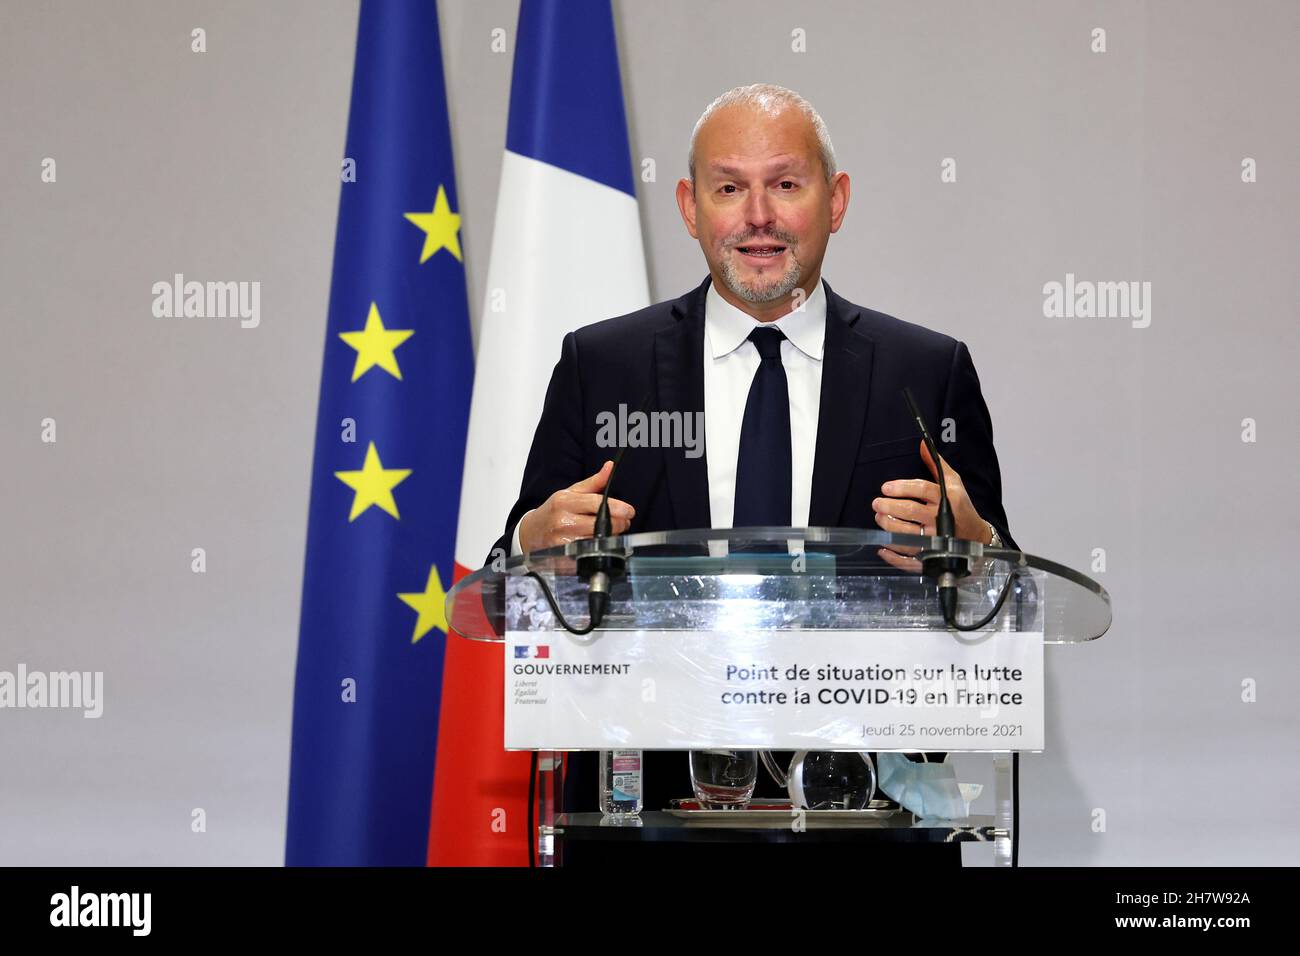 Director General of Health Jerome Salomon speaks during a news conference  on the coronavirus disease (COVID-19) situation in France and upcoming new  governmental measures to curb the spread of the virus, in